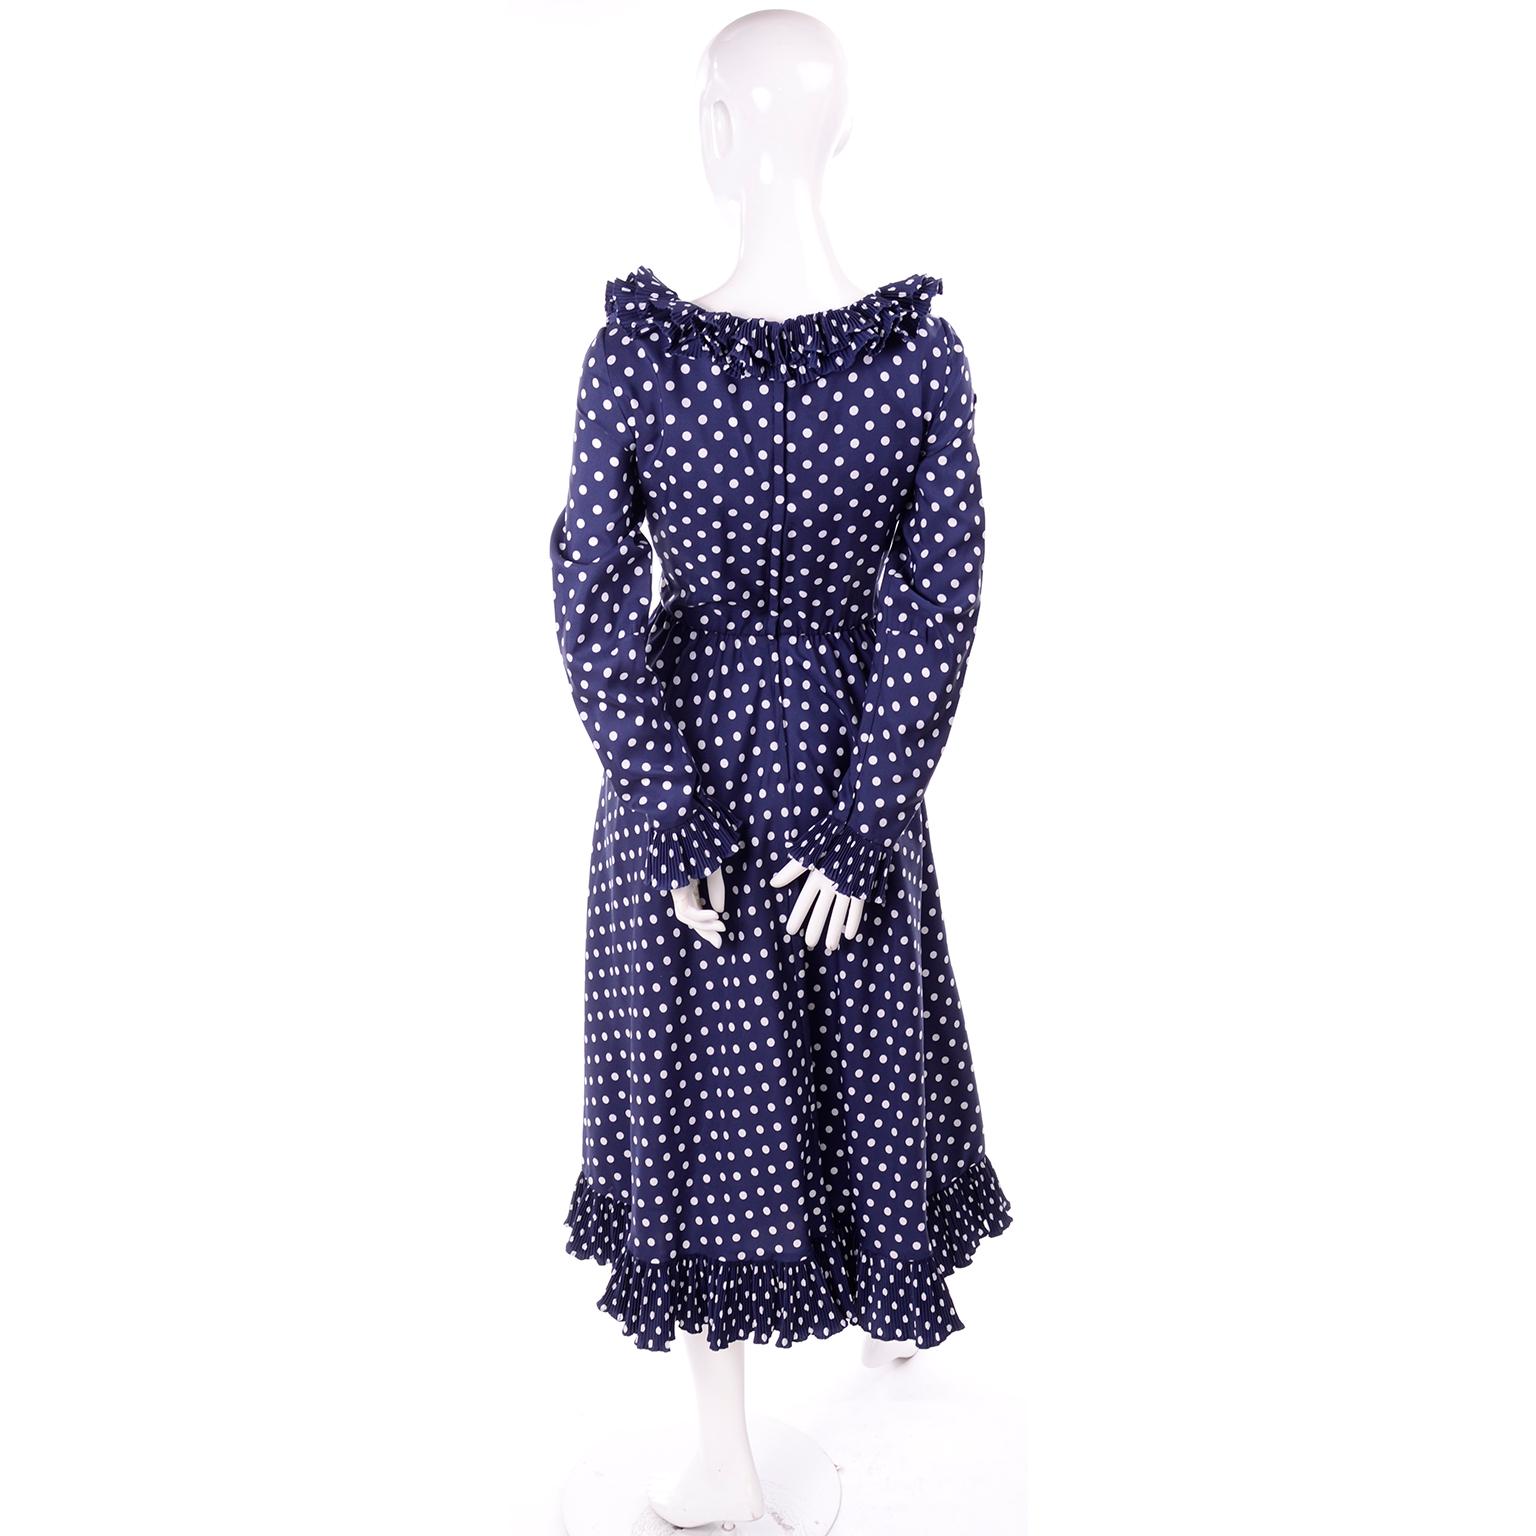 Black 1970s Victor Costa Navy Blue & White Polka Dot Vintage Dress With Ruffles For Sale